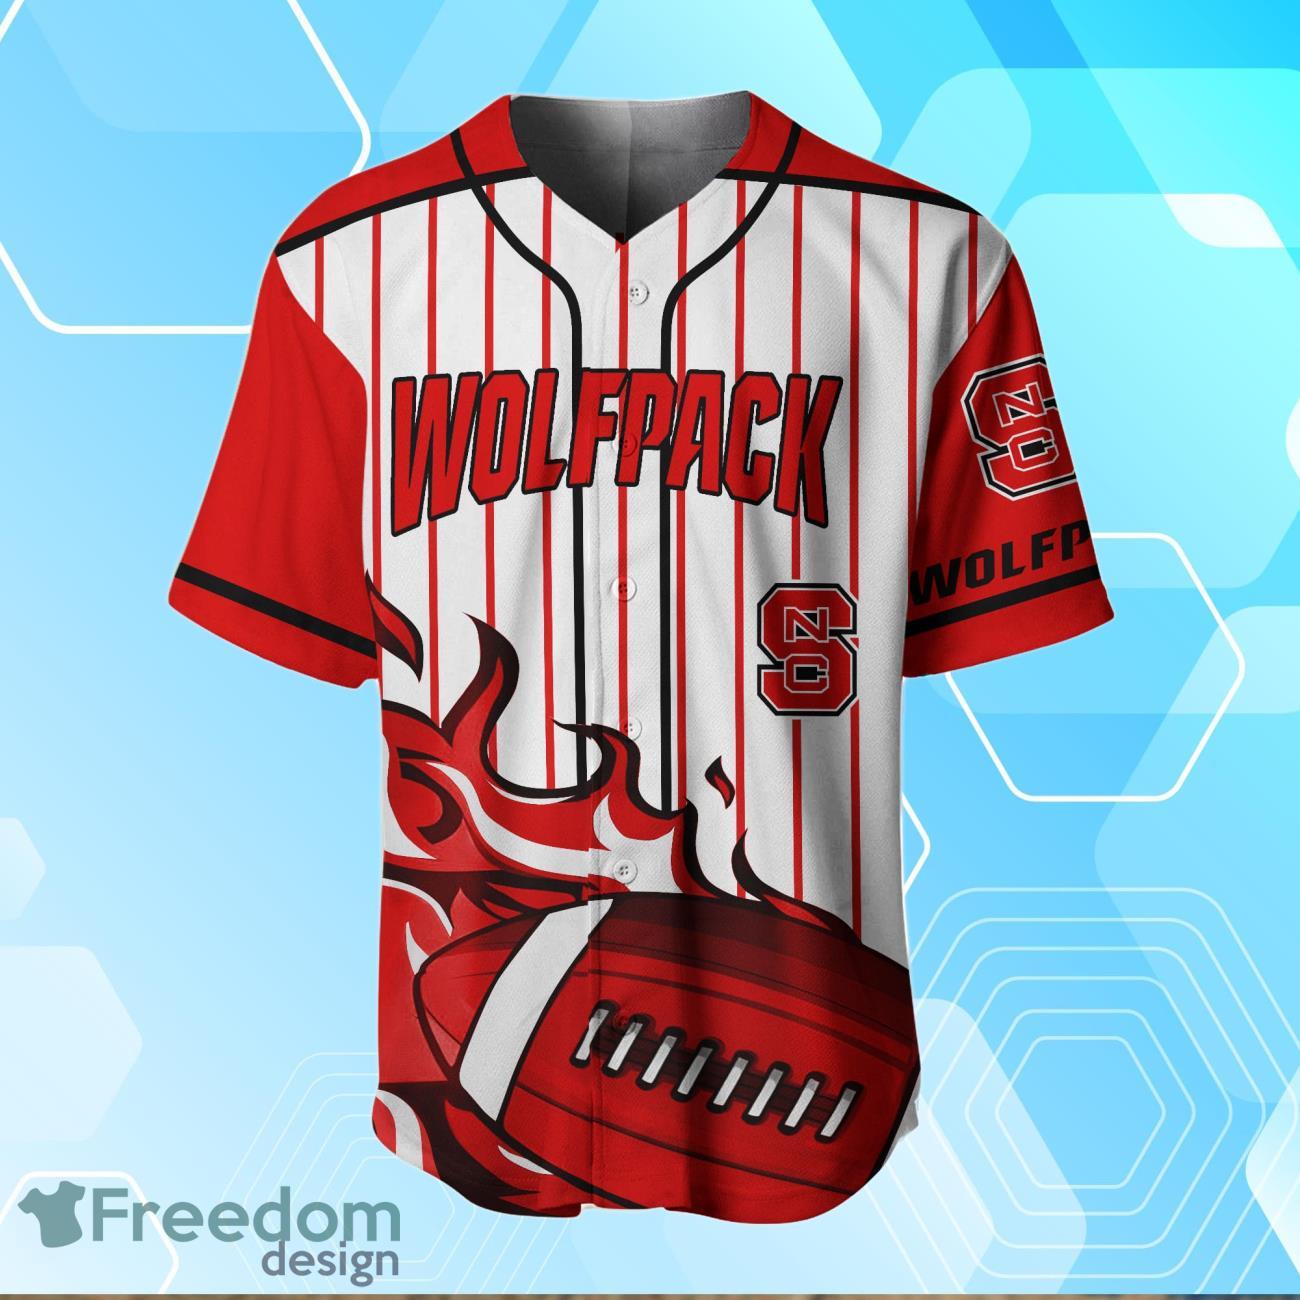 NC State Wolfpack Classic Baseball Jersey Shirt in 2023